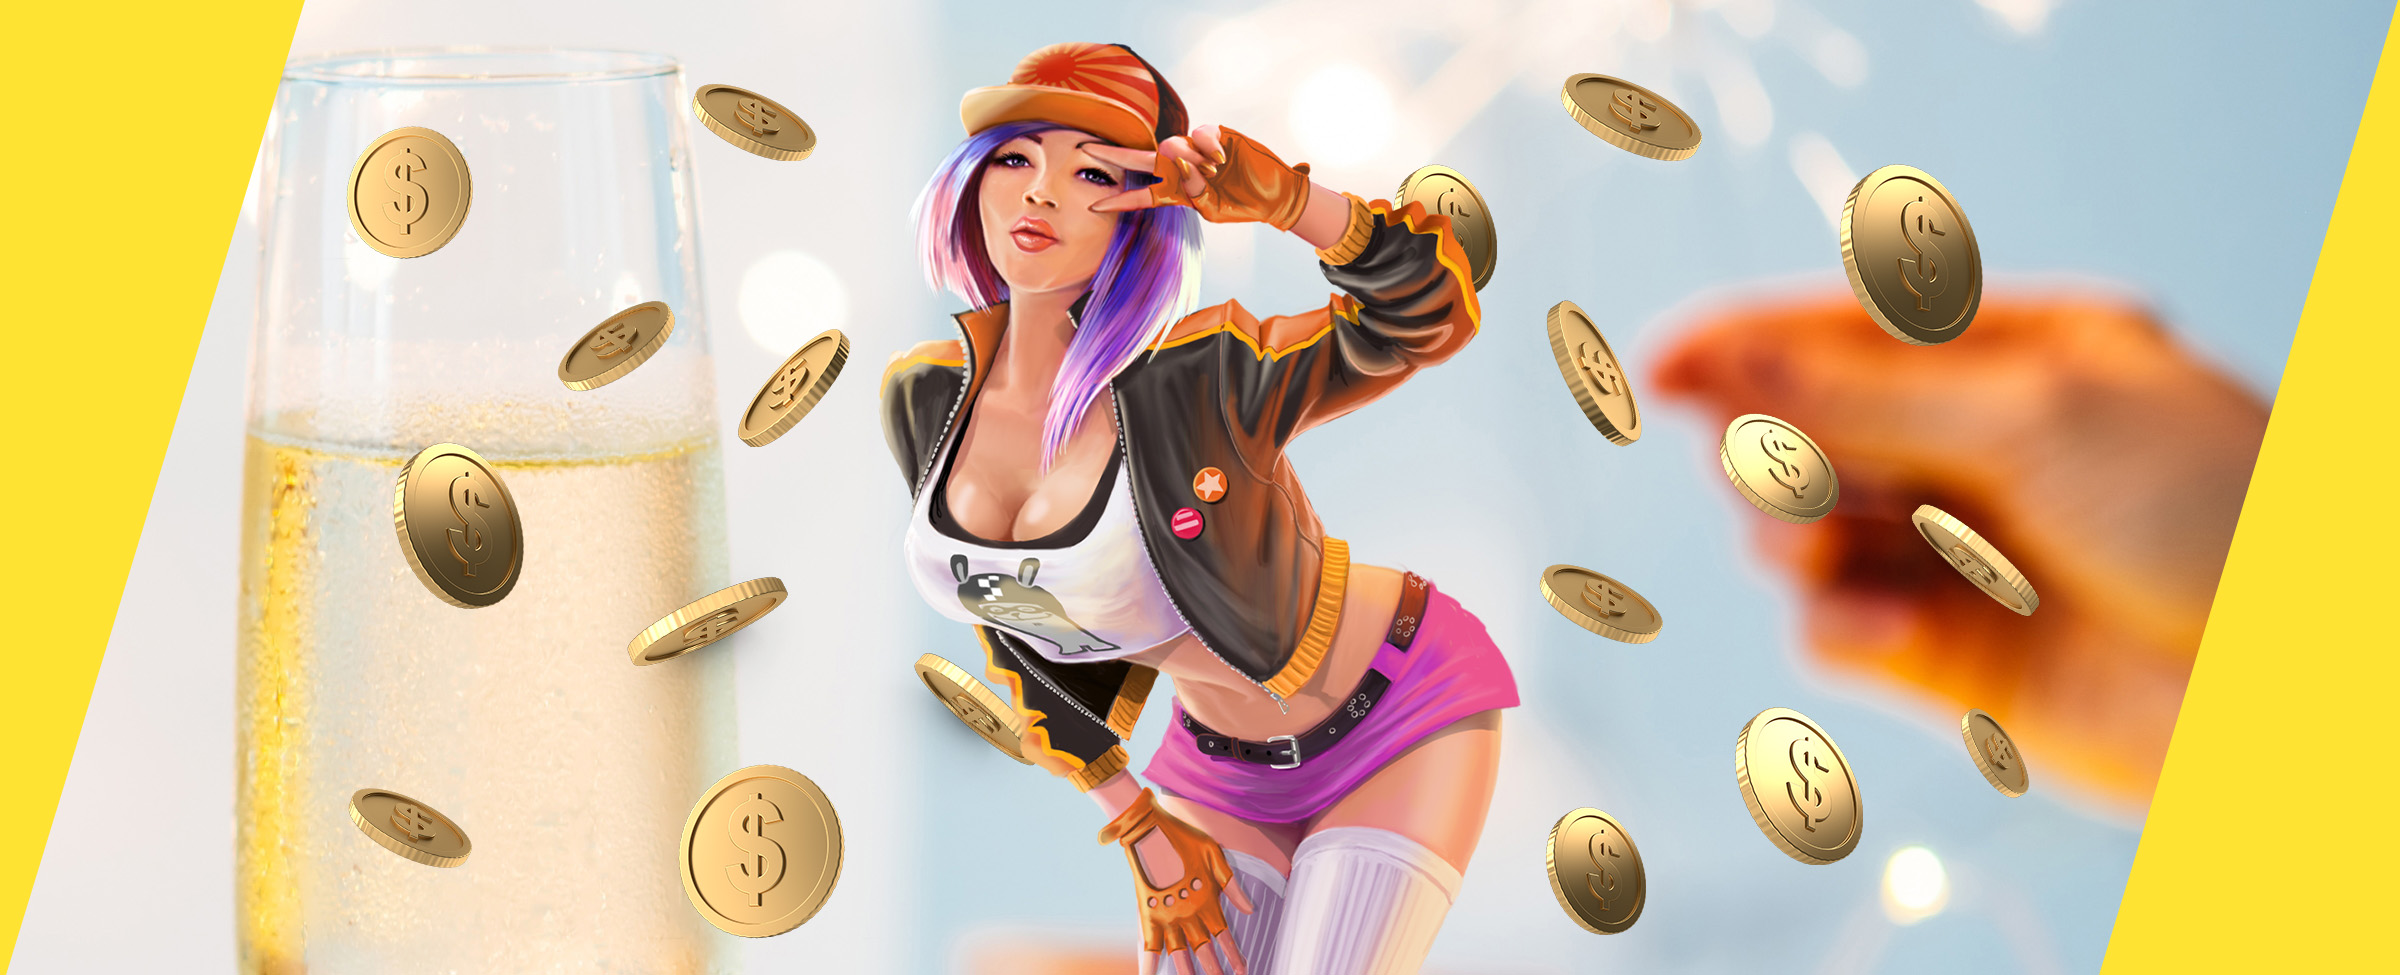 A 3D-animated girl in her twenties is featured in the center of the image, wearing edgy clothing, and bending forward slightly with one hand held up to her eye in a peace gesture. Floating in the air are gold coins, while a champagne glass is seen in the background.